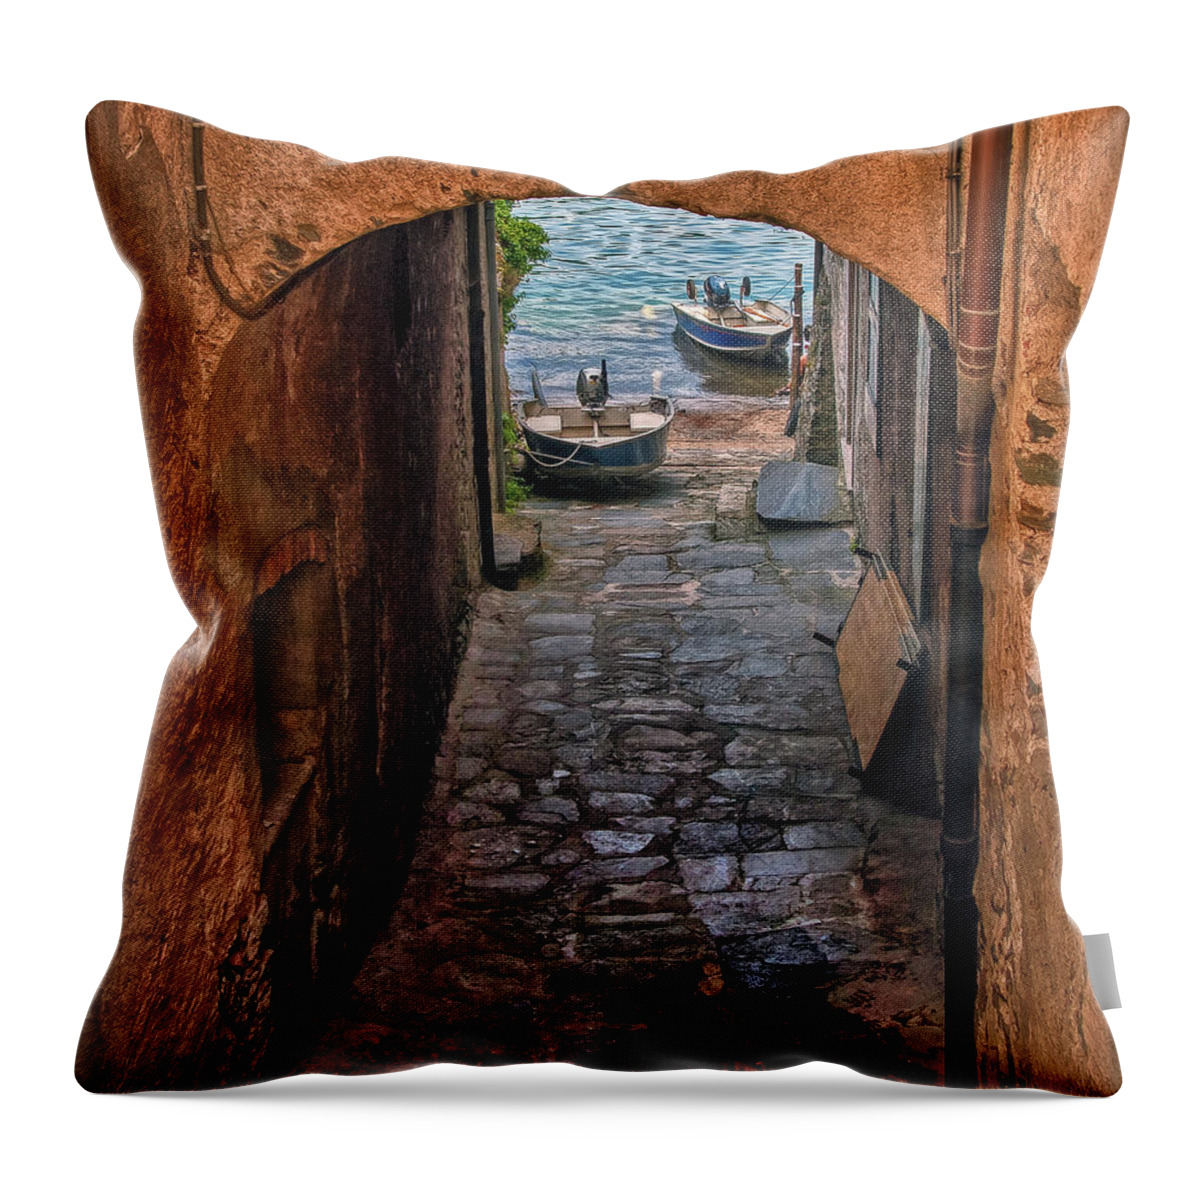 Lake Throw Pillow featuring the photograph Areaway Alley by Hanny Heim